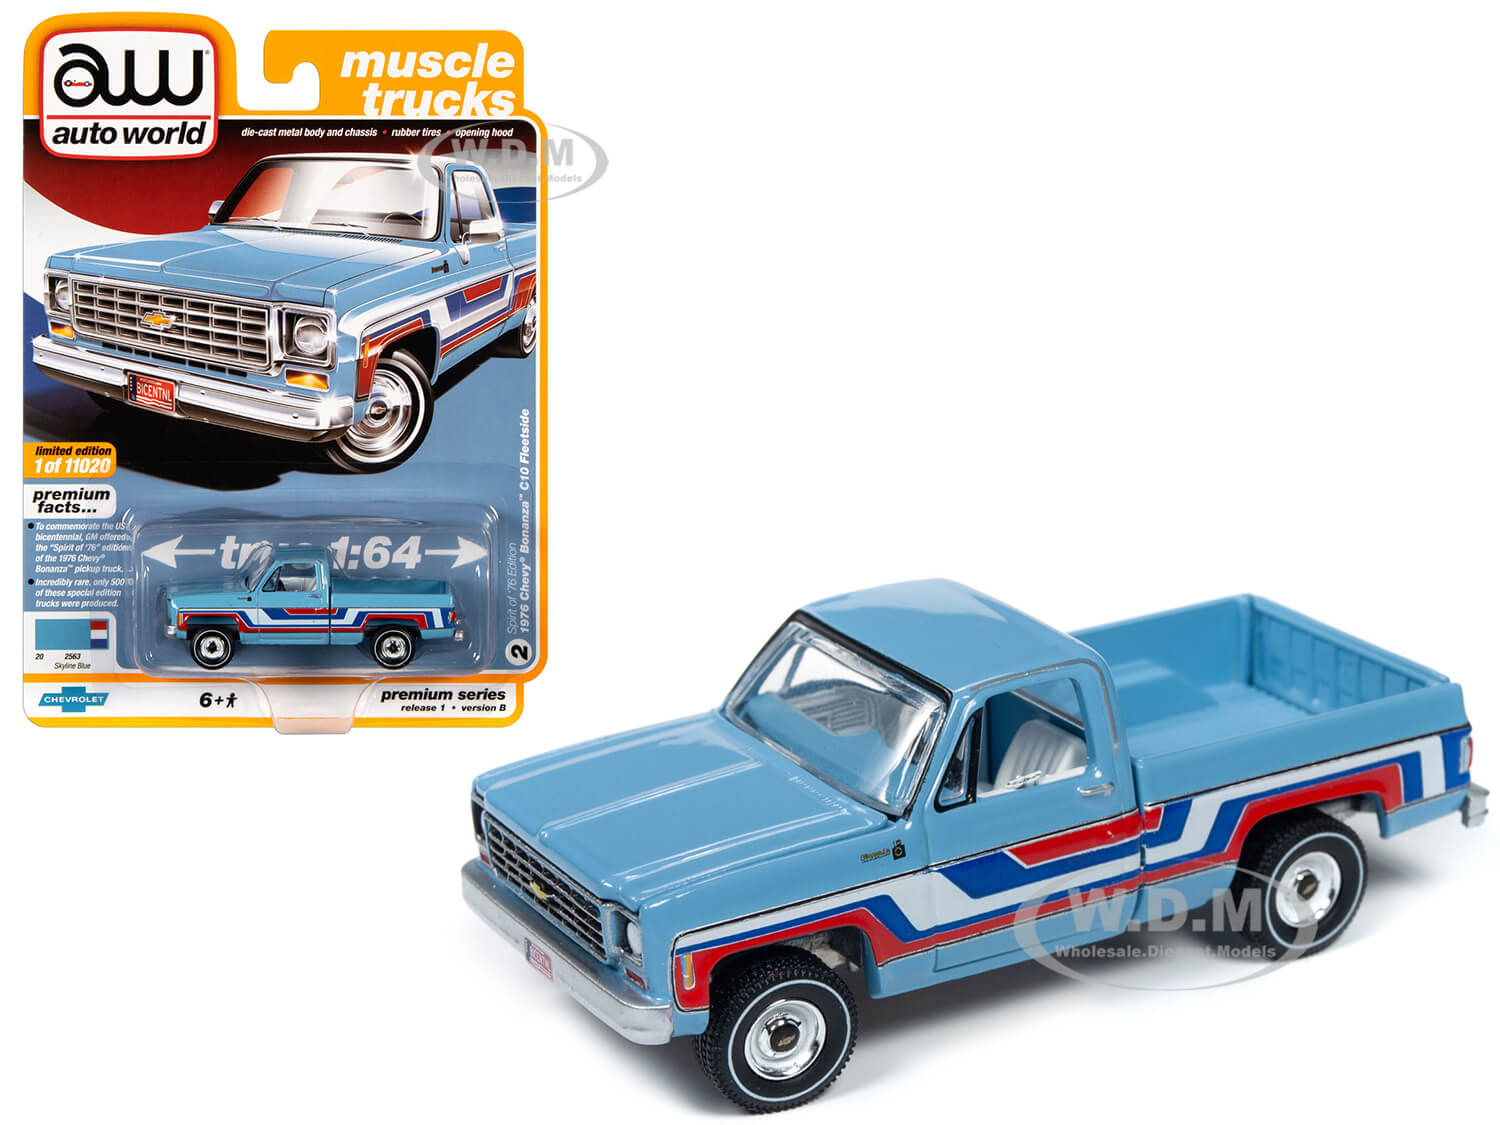 1976 Chevrolet Bonanza C10 Fleetside Pickup Truck Bicentennial Edition Skyline Blue With Stripes Muscle Trucks Limited Edition To 11020 Pieces Wo